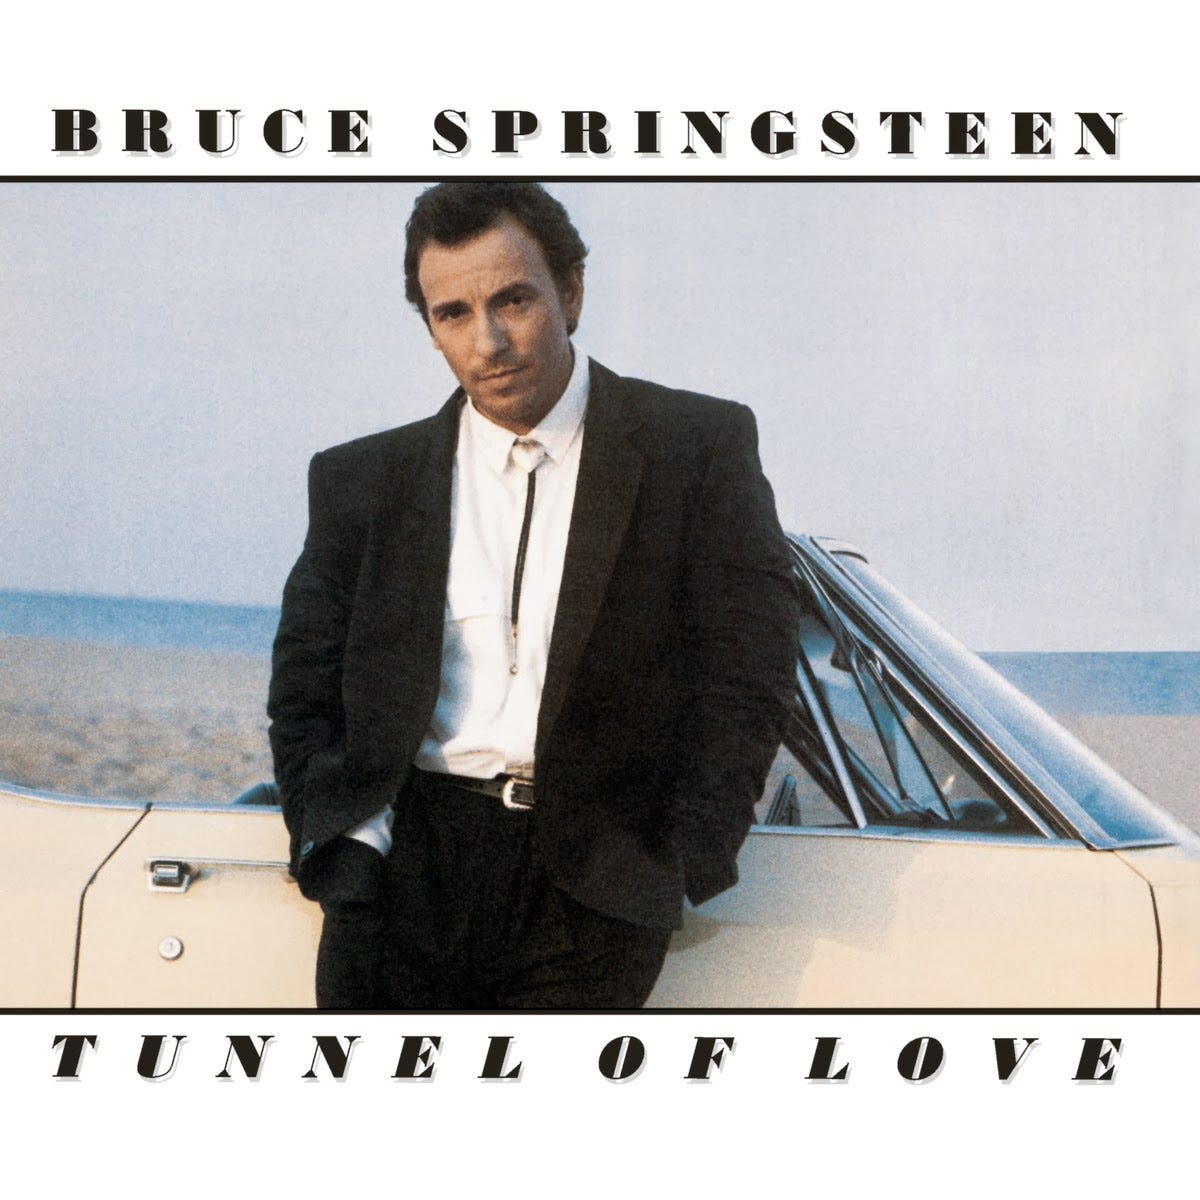 An Album A Day...: 9th October - Bruce Springsteen's Tunnel of Love